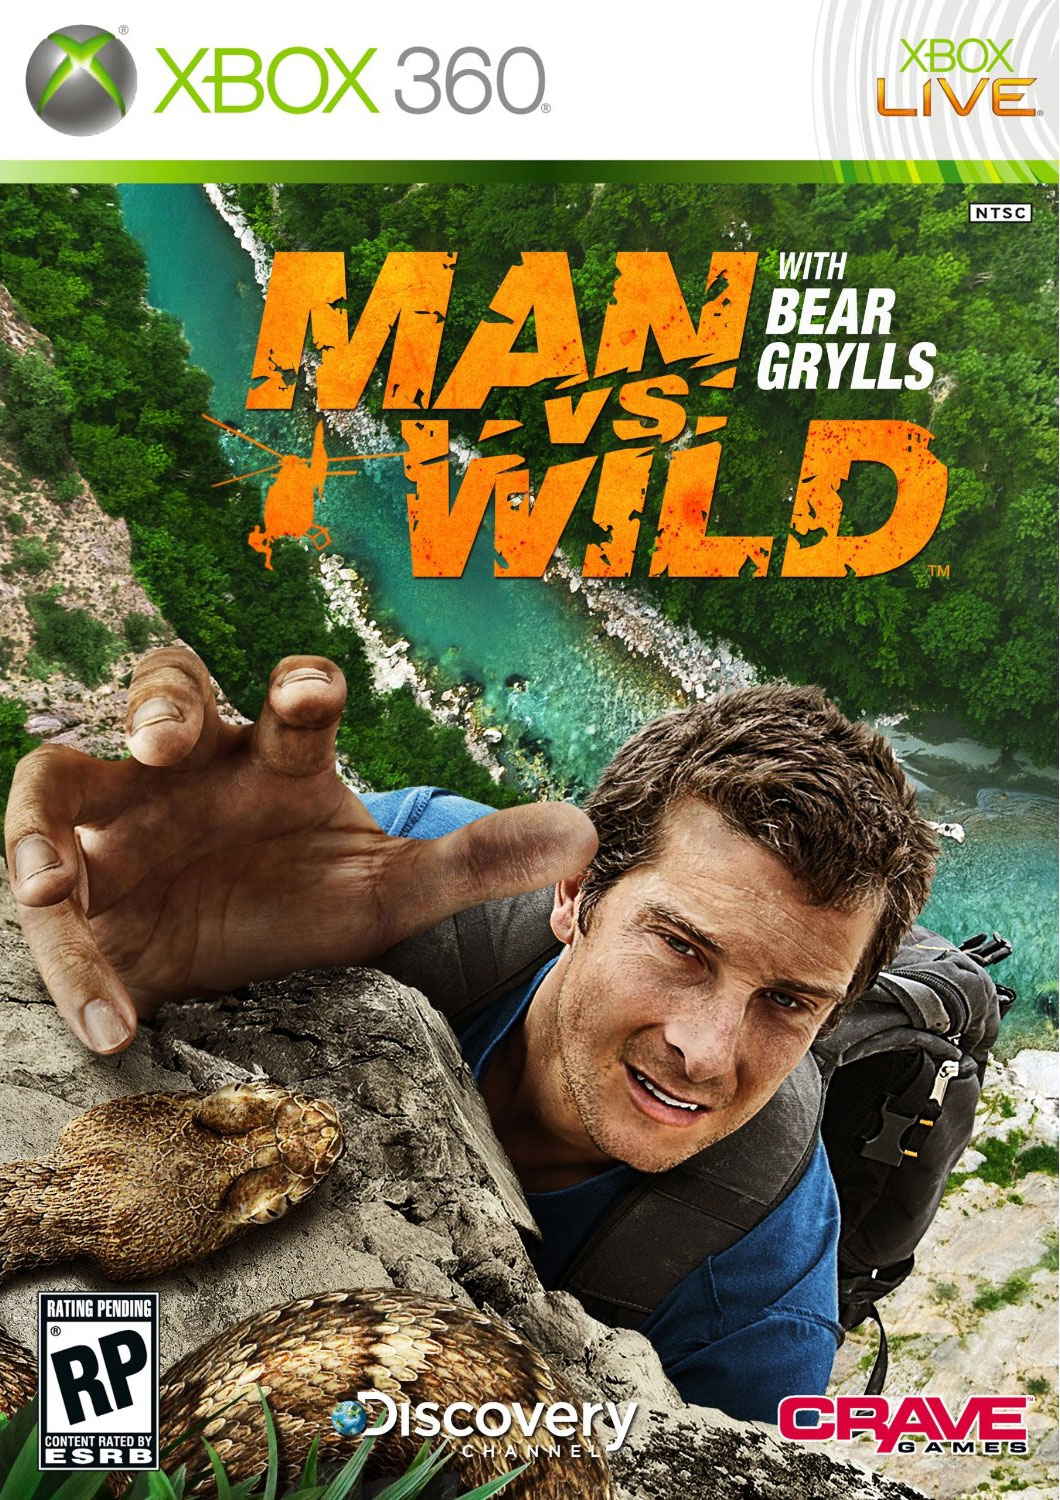 Svg Distribution Man Vs. Wild - Xbox 360 Console_Video_Games - image 1 of 6